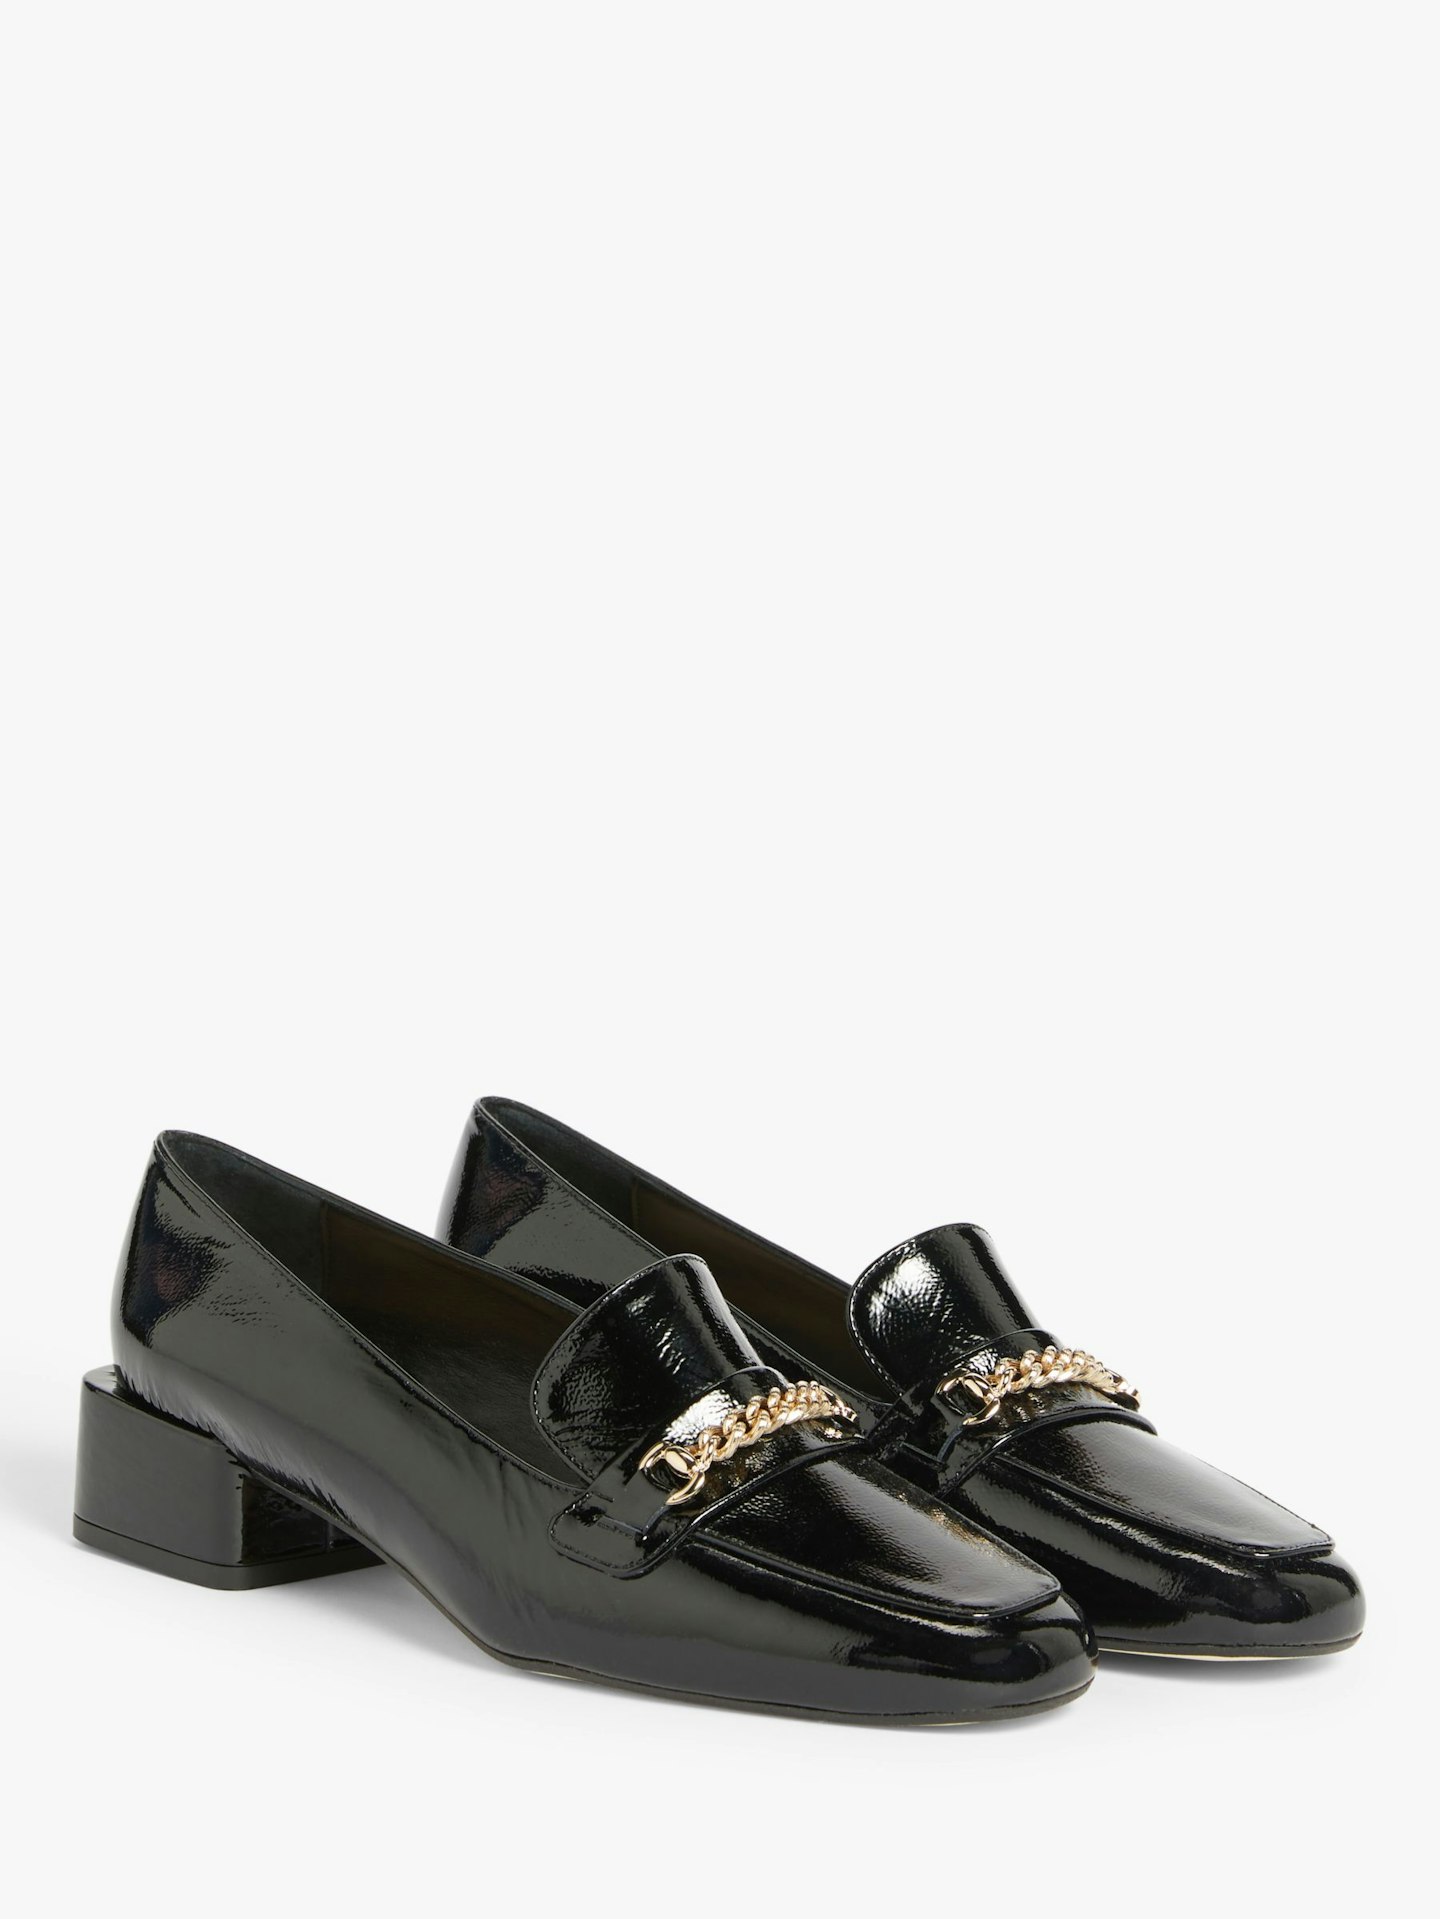 John Lewis & Partners, Astrid Patent Loafers, £74.25